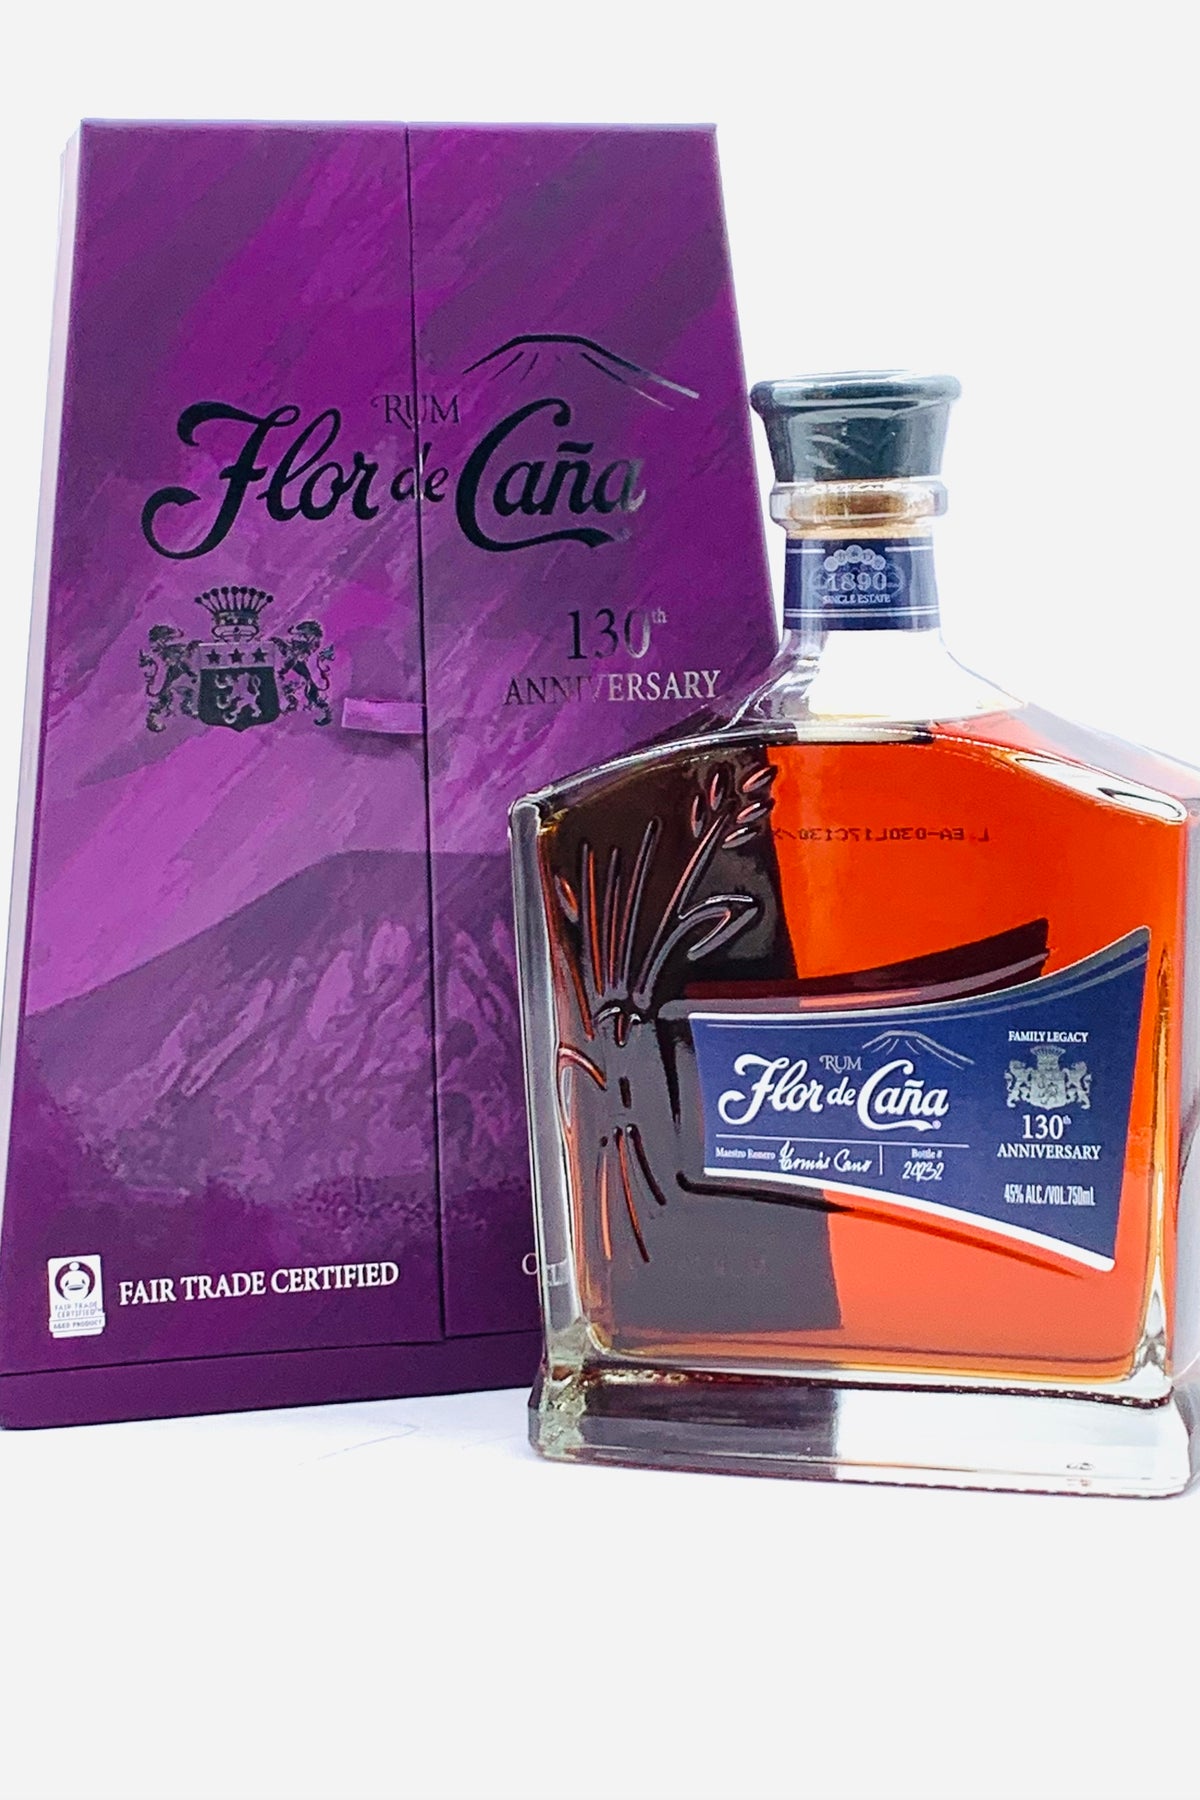 Flor de Cana 130th Anniversary 20 Year old Rum